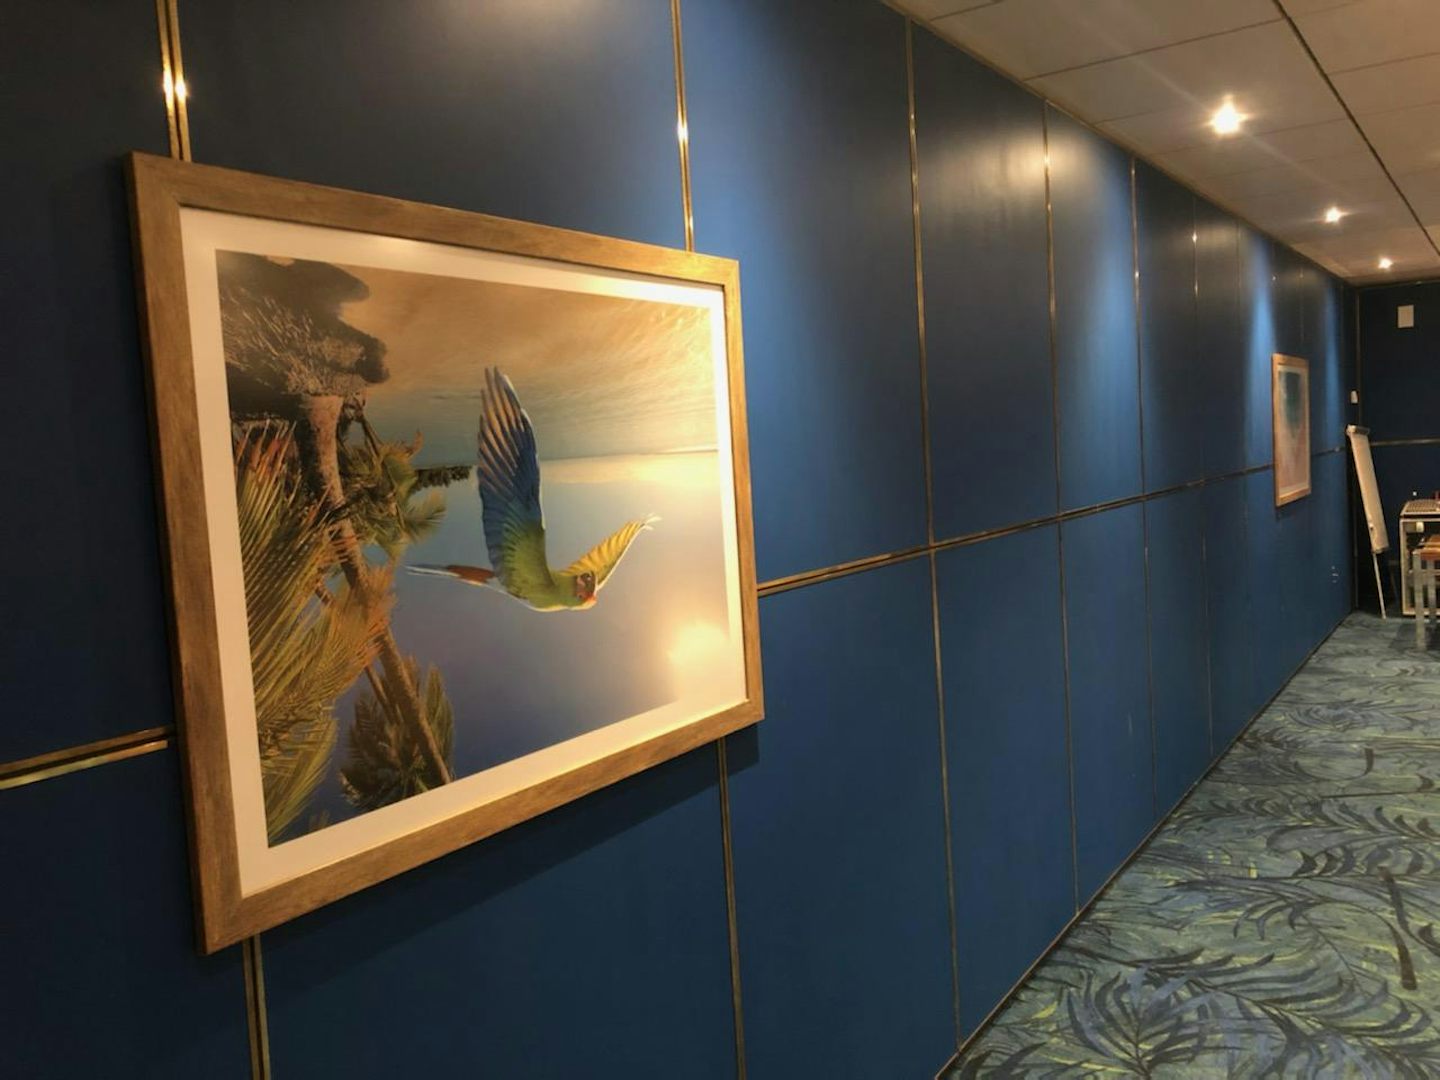 Yes, that art has been permanently installed upside down.  This is in keeping with the level of care given to the Margaritaville rebrand.